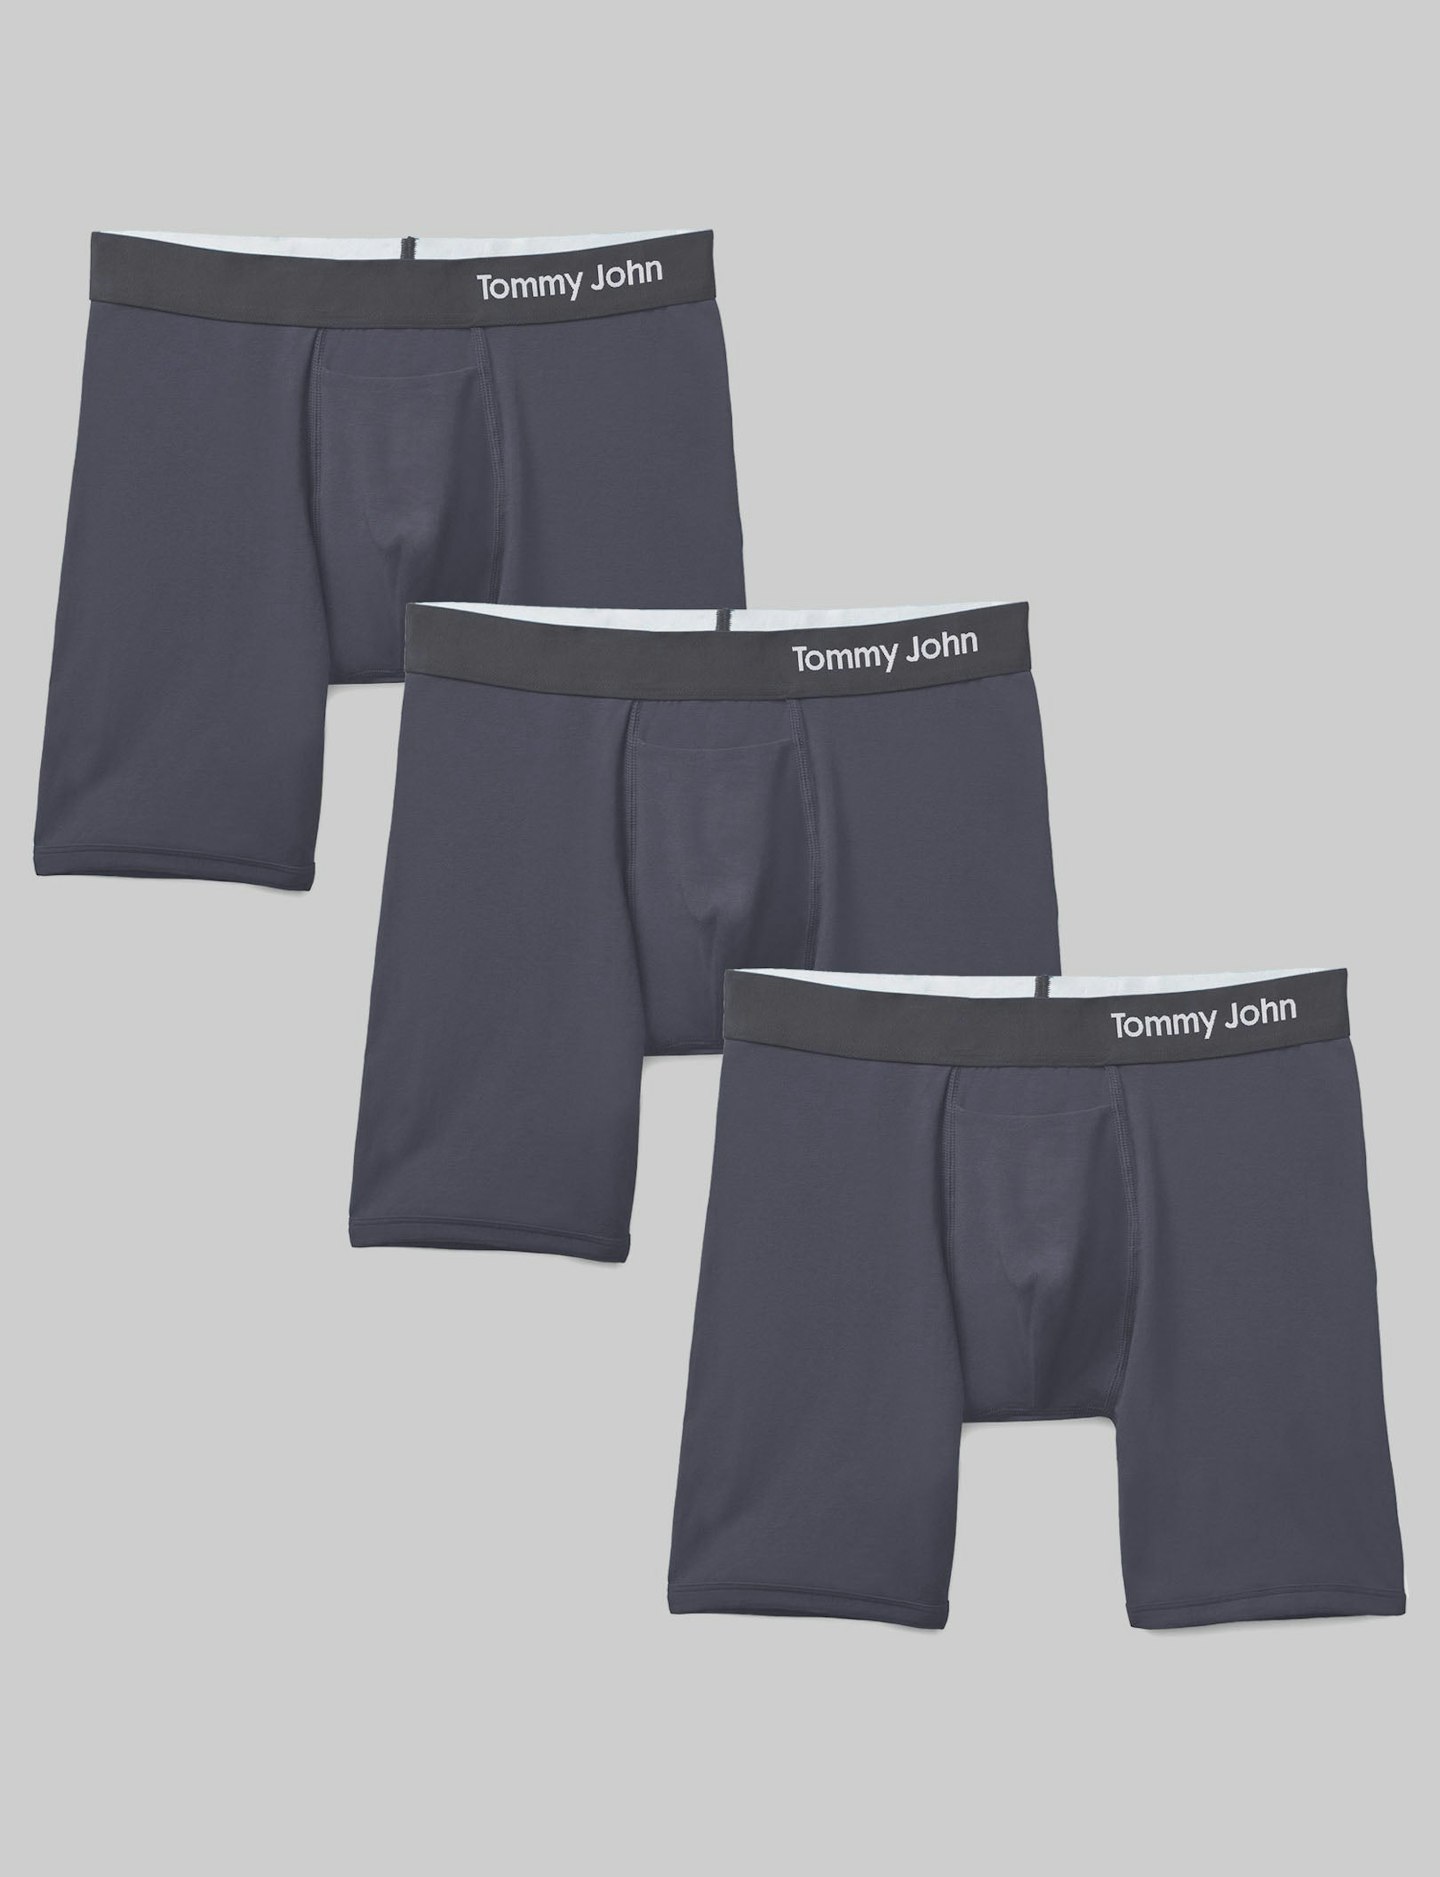 Tommy John Cool Cotton Mid Length 6 In. Boxer Briefs, Underwear, Clothing  & Accessories